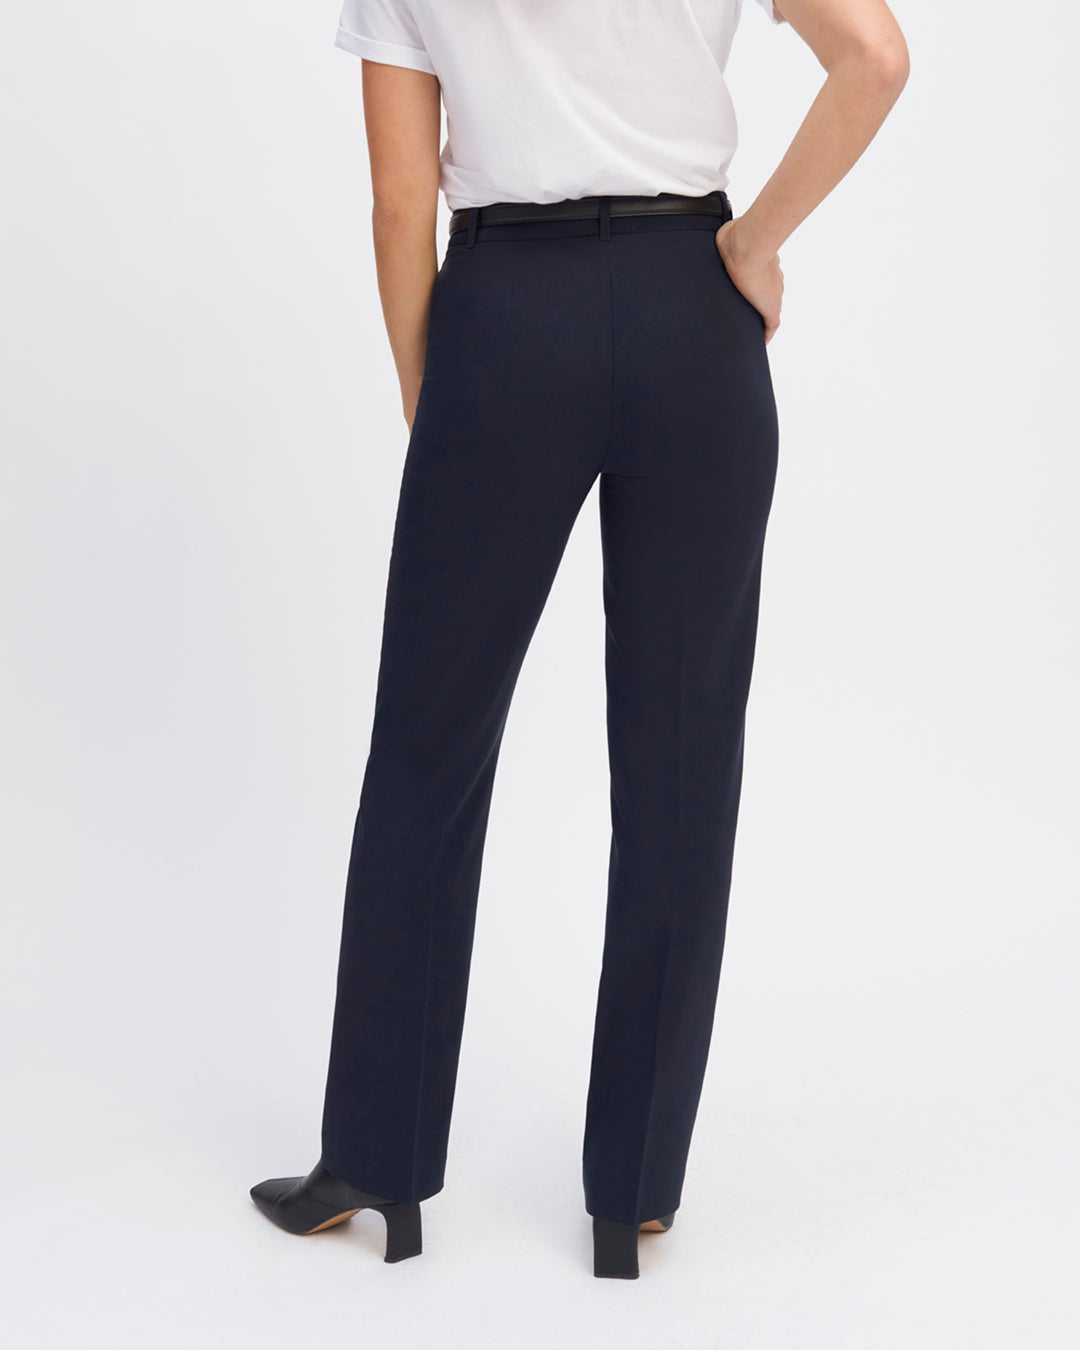 Navy-blue-tailor-trousers-Square-cut-High-waist-Lined-for-a-straight-dress-Navy-blue-wool-drap-Belt-panels-Zip-closure-with-hook-Button-camel-17H10-tailors-for-women-paris-